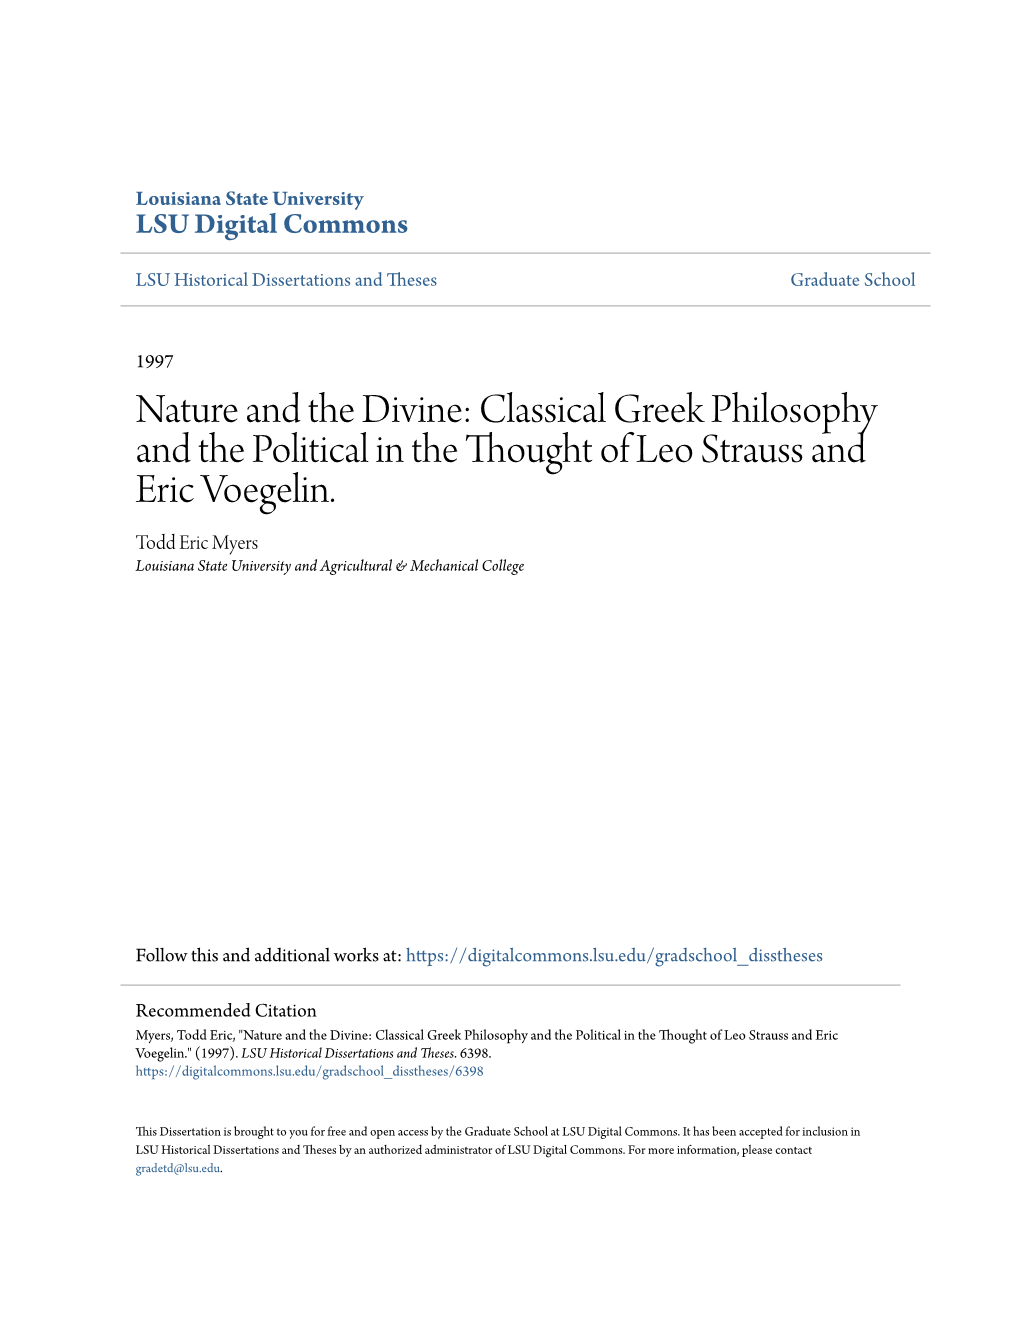 Nature and the Divine: Classical Greek Philosophy and the Political in the Thought of Leo Strauss and Eric Voegelin